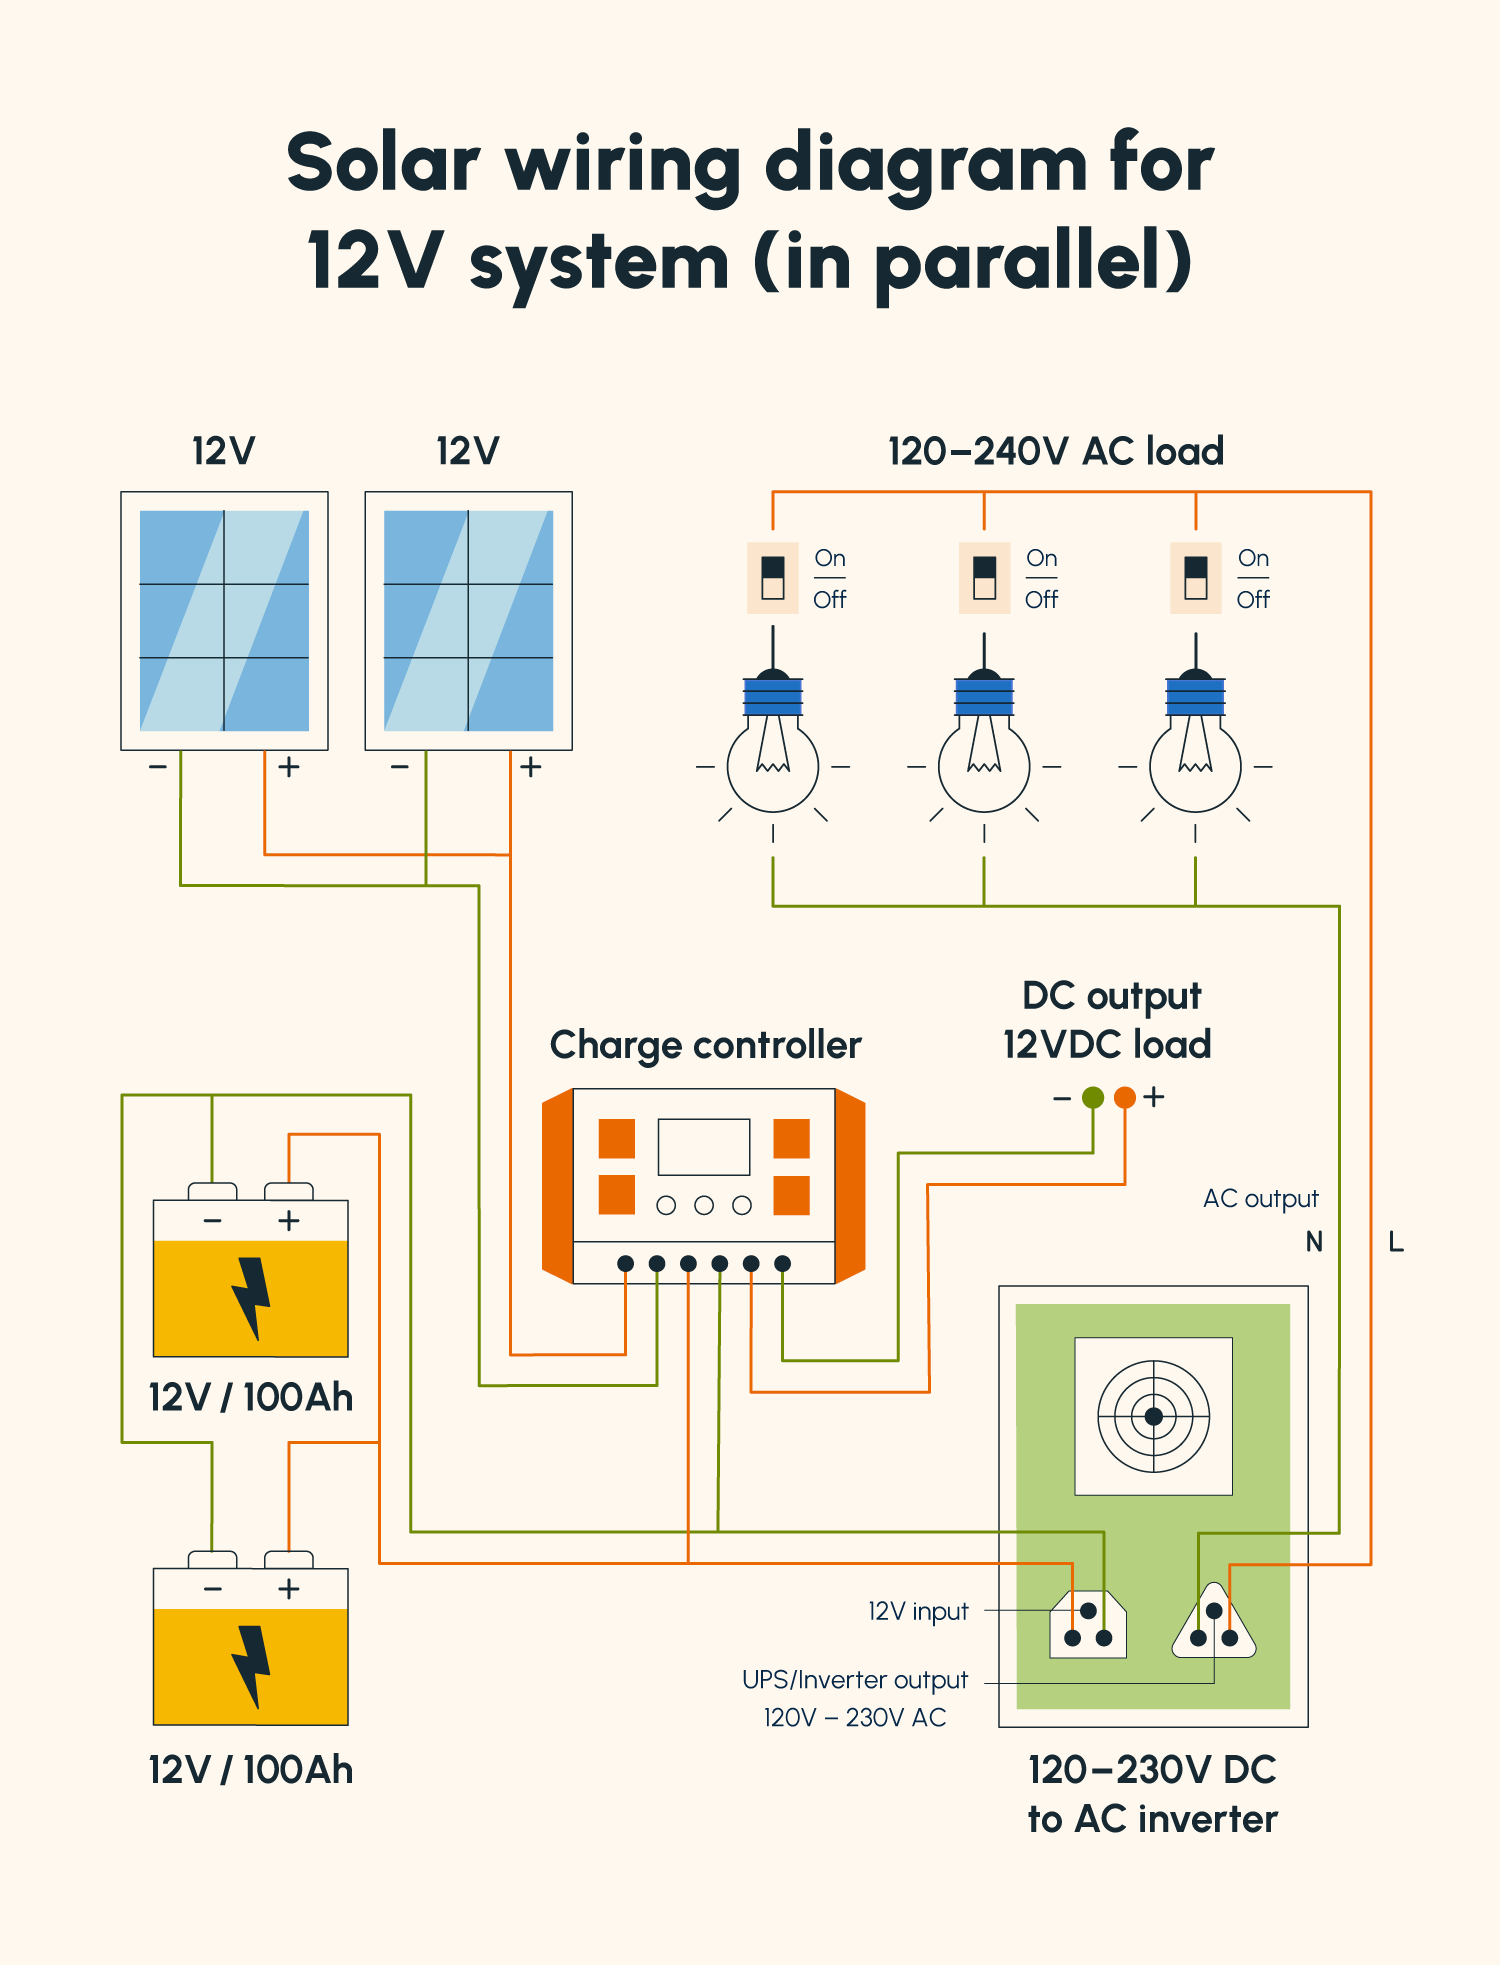 An illustrated solar panel wiring diagram for a 12V solar system wired in parallel